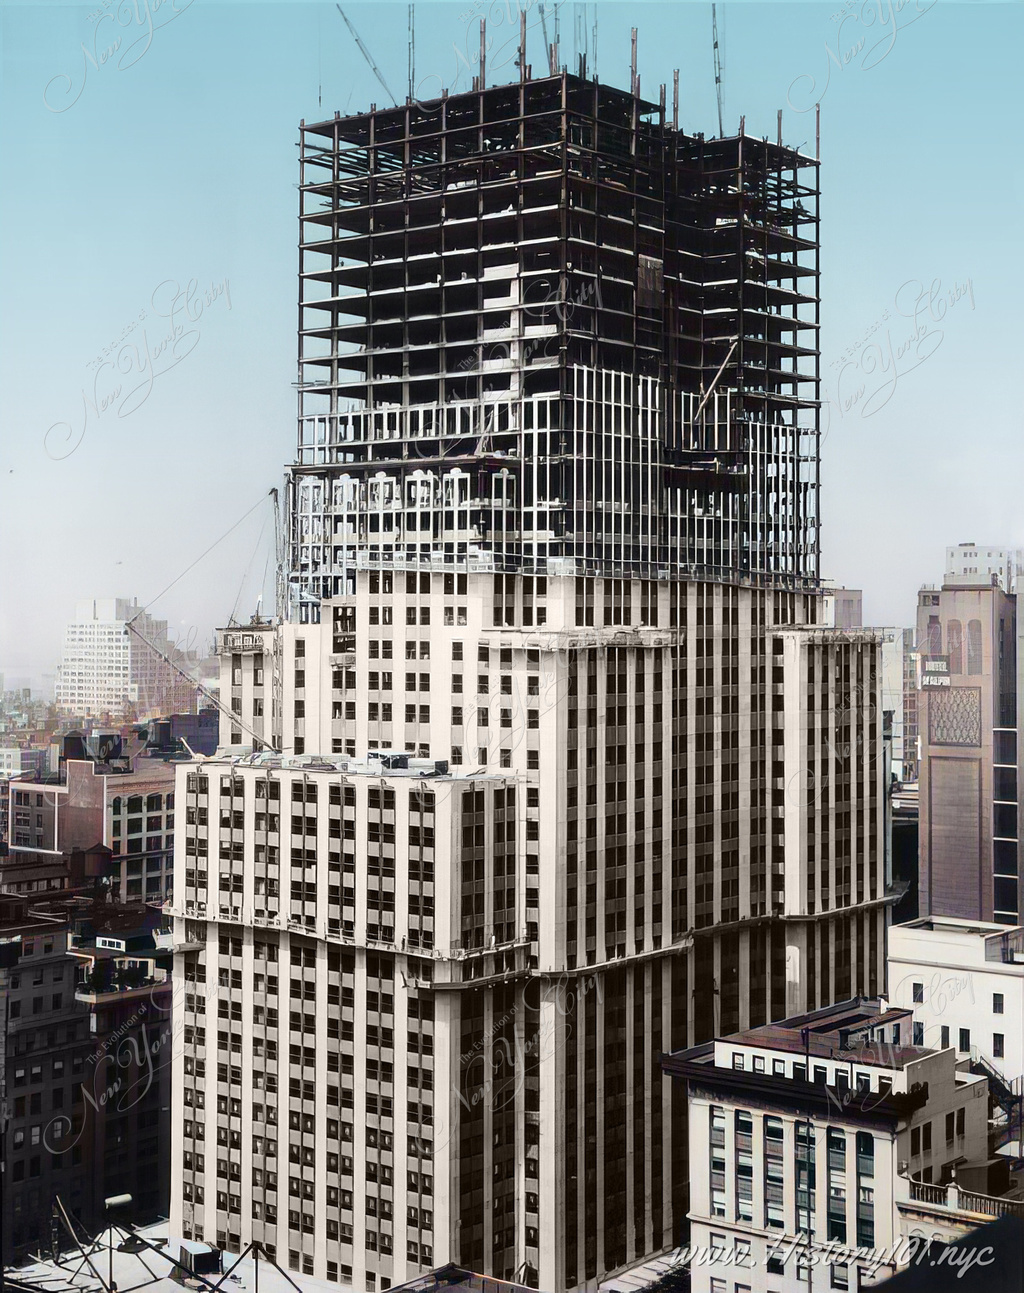 In the bustling metropolis of New York City in the early 1930s, a monumental feat of engineering and ambition was taking shape - the construction of the iconic Empire State Building.